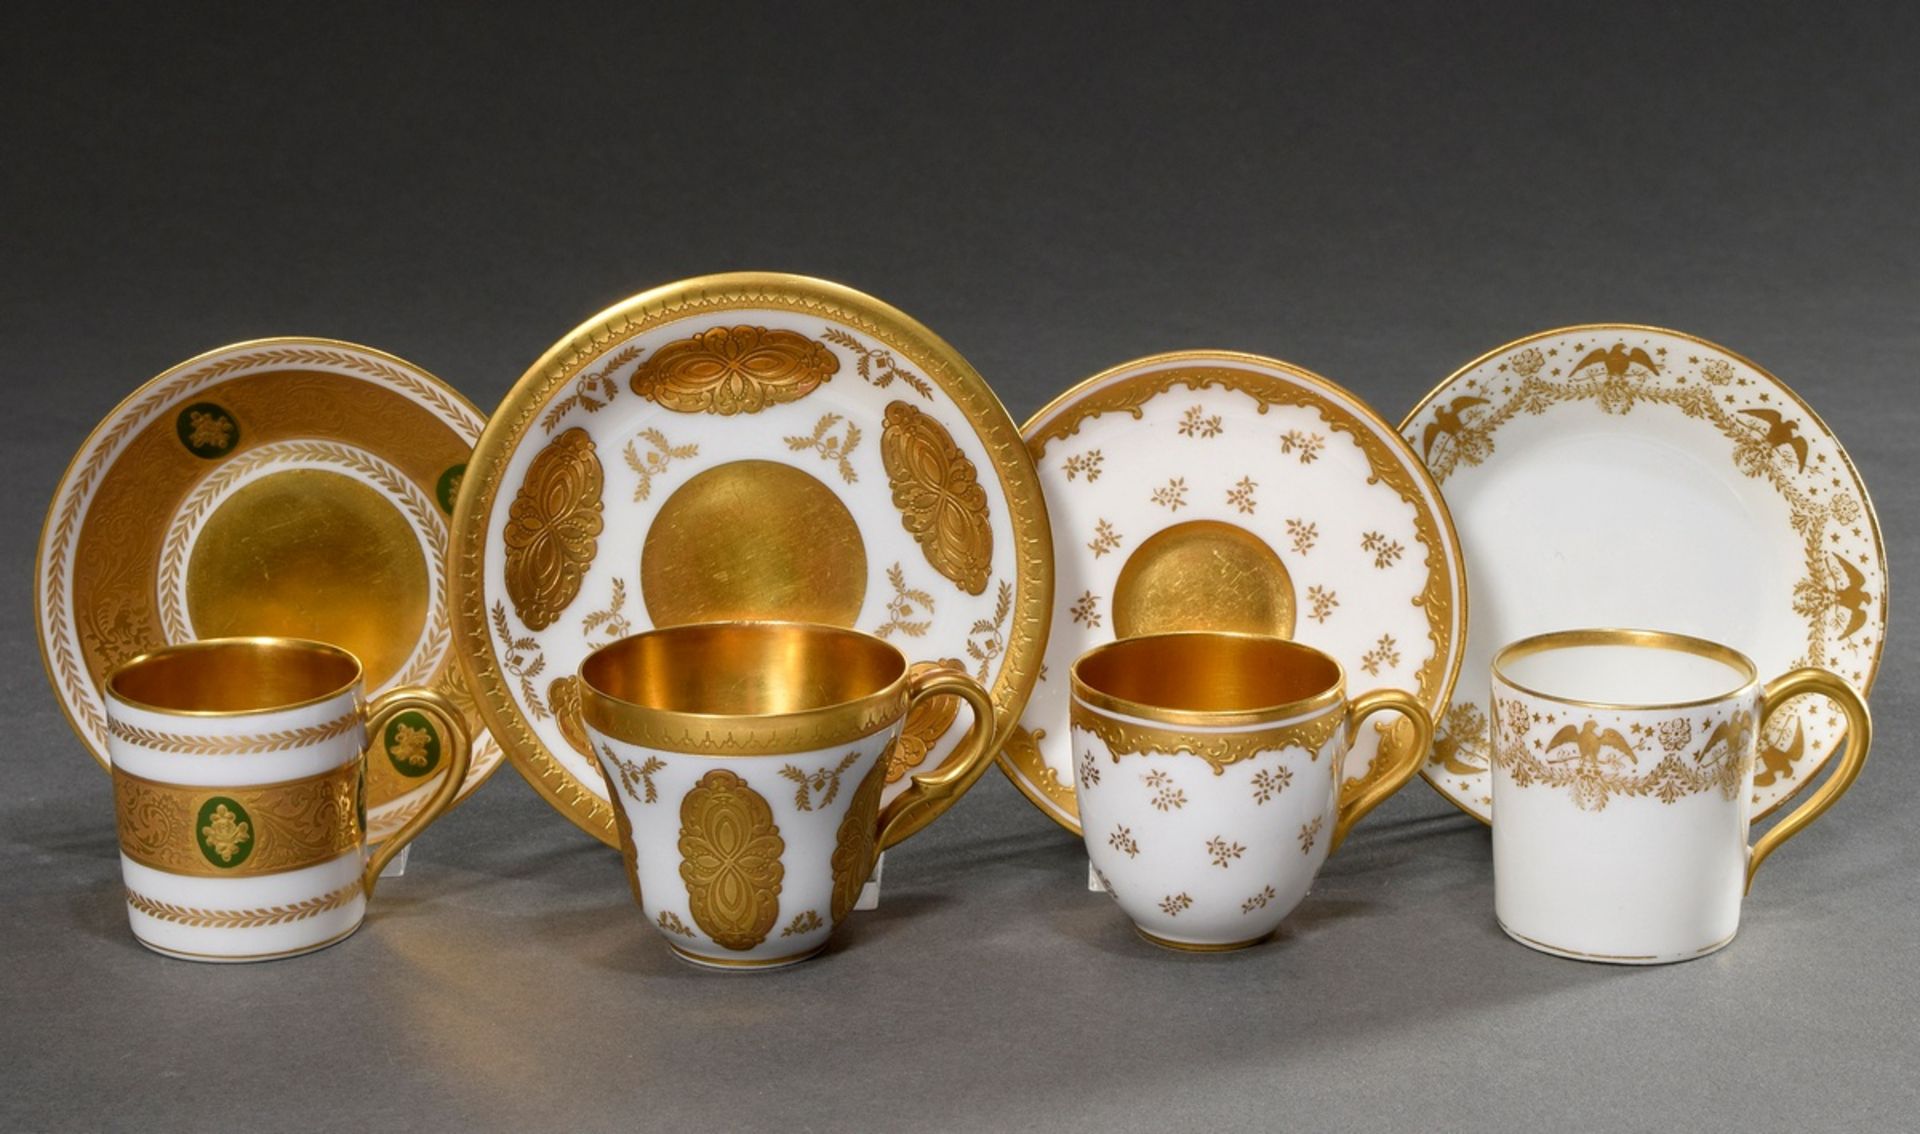 4 Various porcelain mocca cups/saucer with different floral and ornamental decorations on white bac